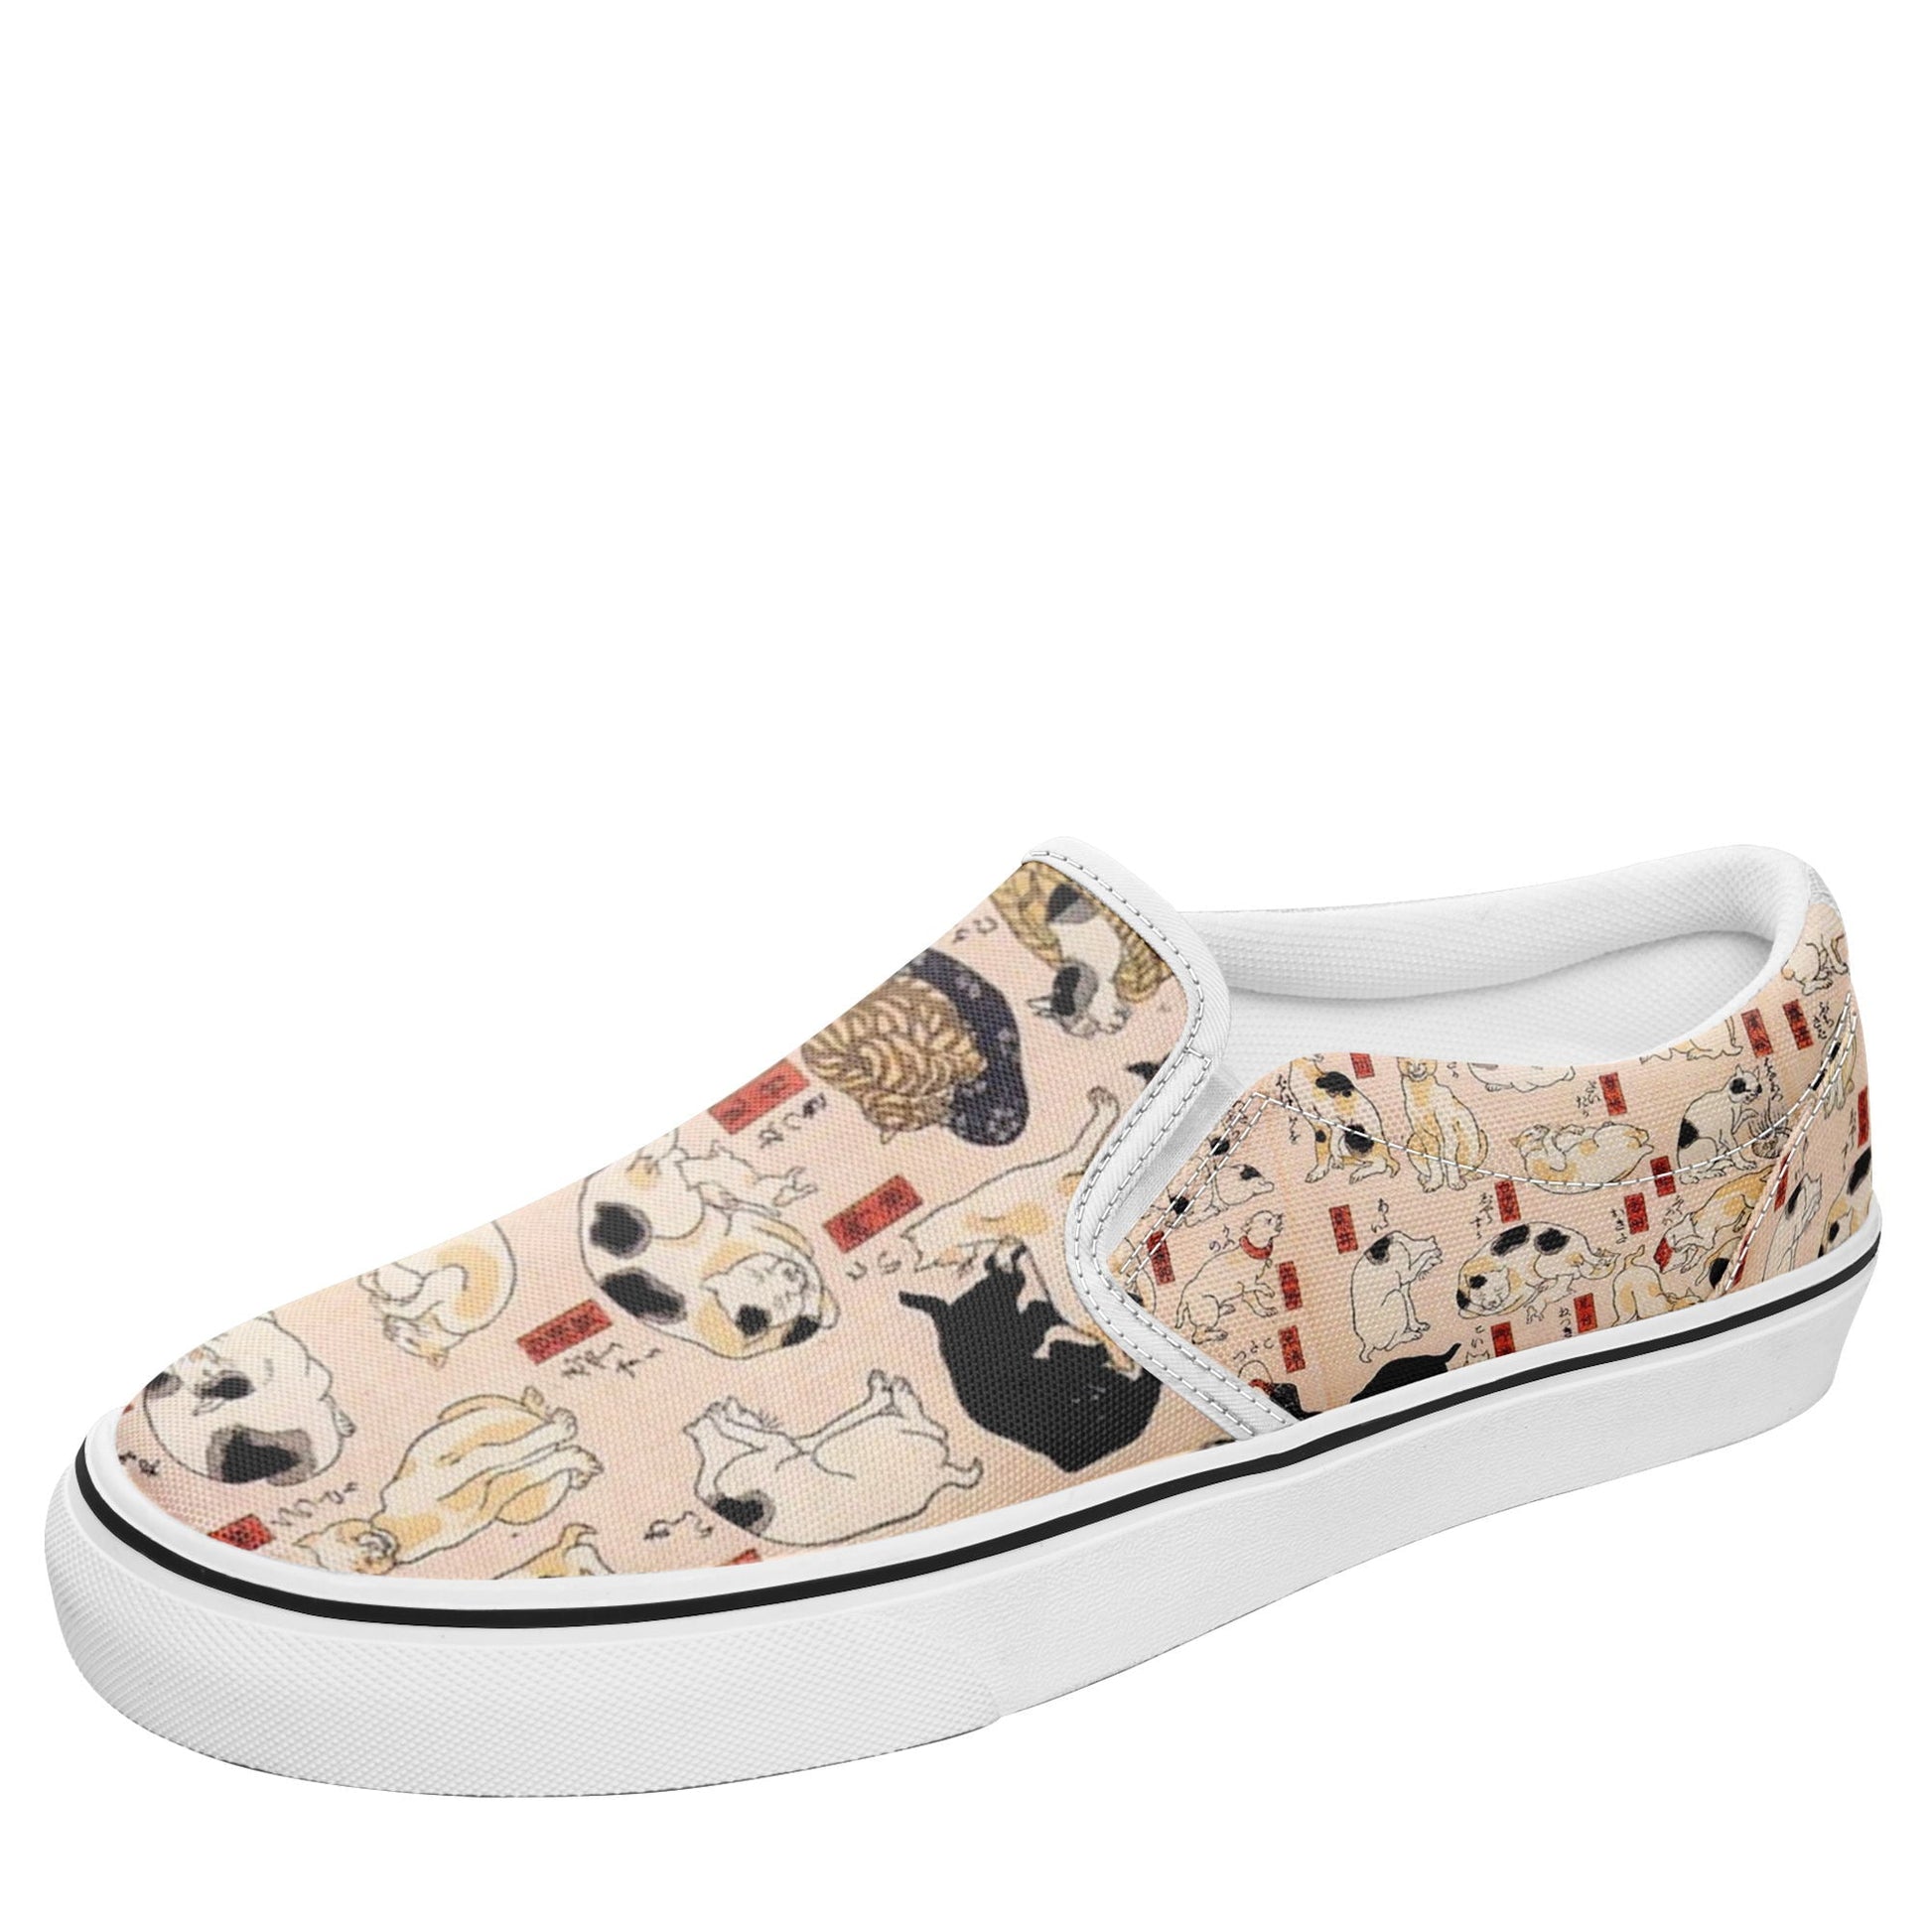 pod ukiyoe sneakers 7216 personalized printed kuniyoshi utagawa's cats suggested as the fifty three stations of the tokaido casual shoes white soles